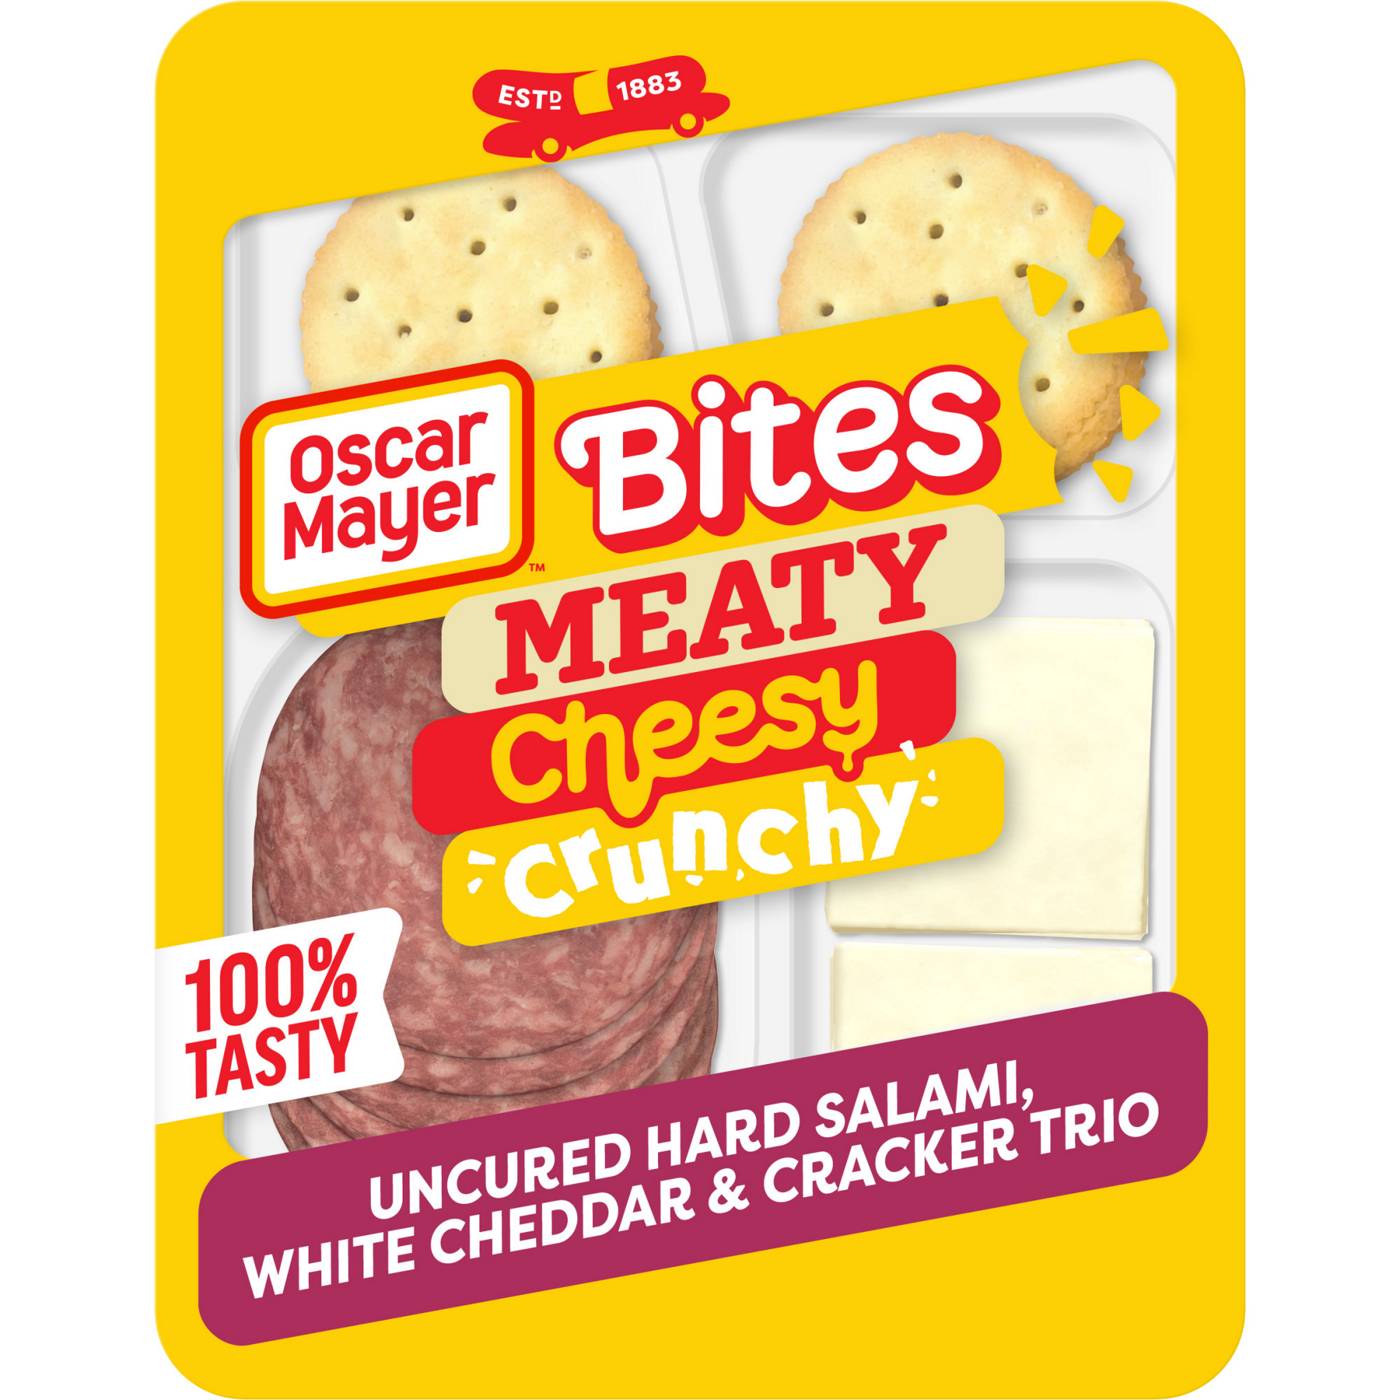 Oscar Mayer Bites Snack Tray - Uncured Hard Salami, White Cheddar & Crackers Trio; image 1 of 7